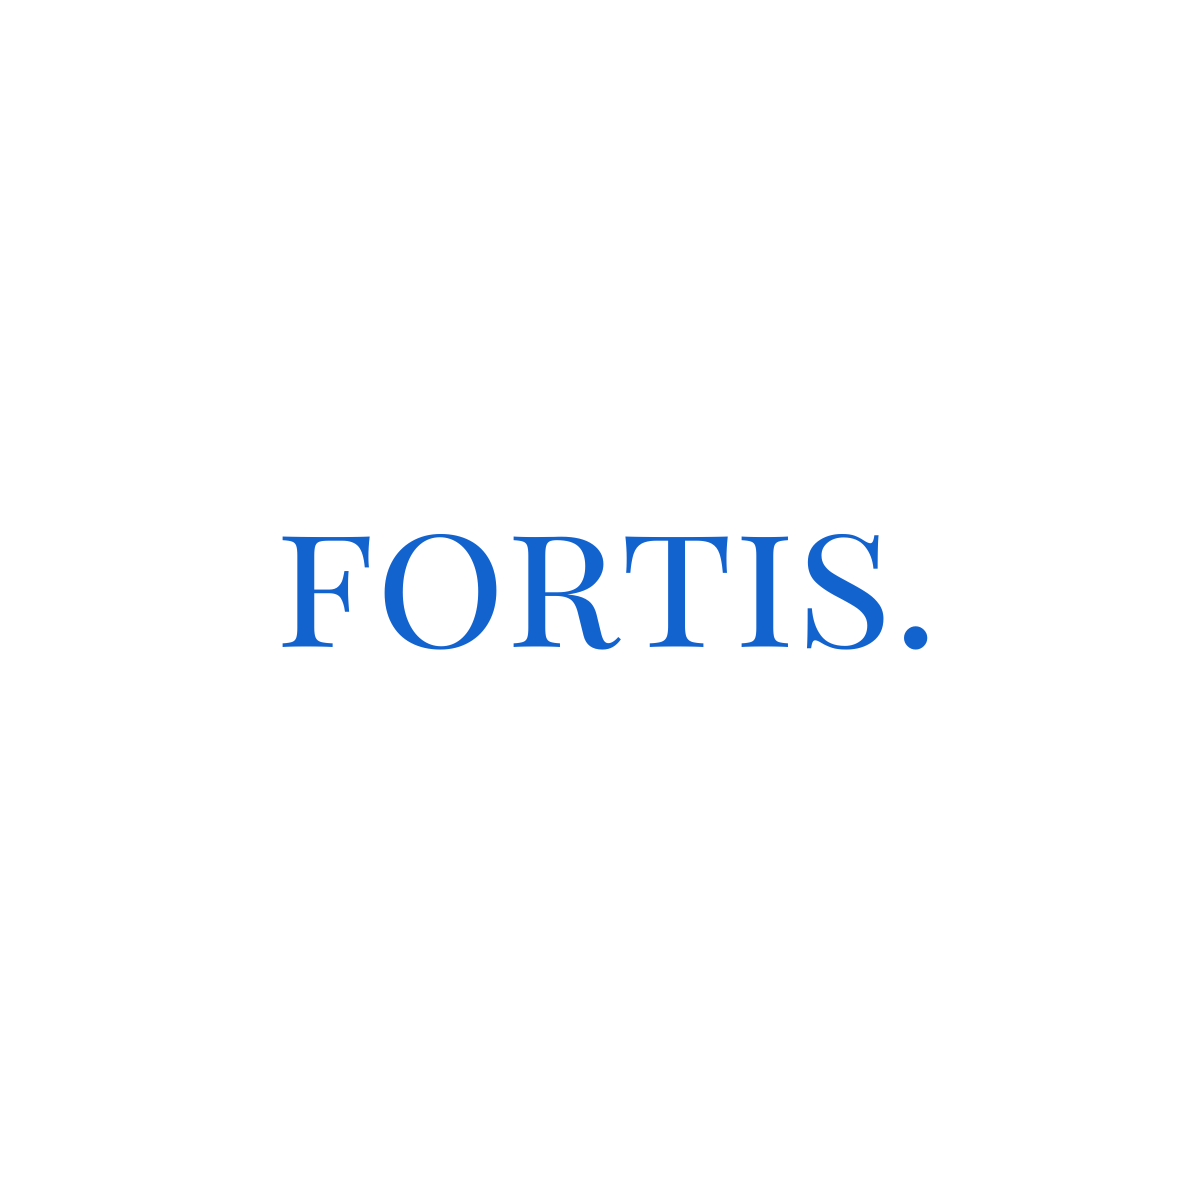 Fortis. Results